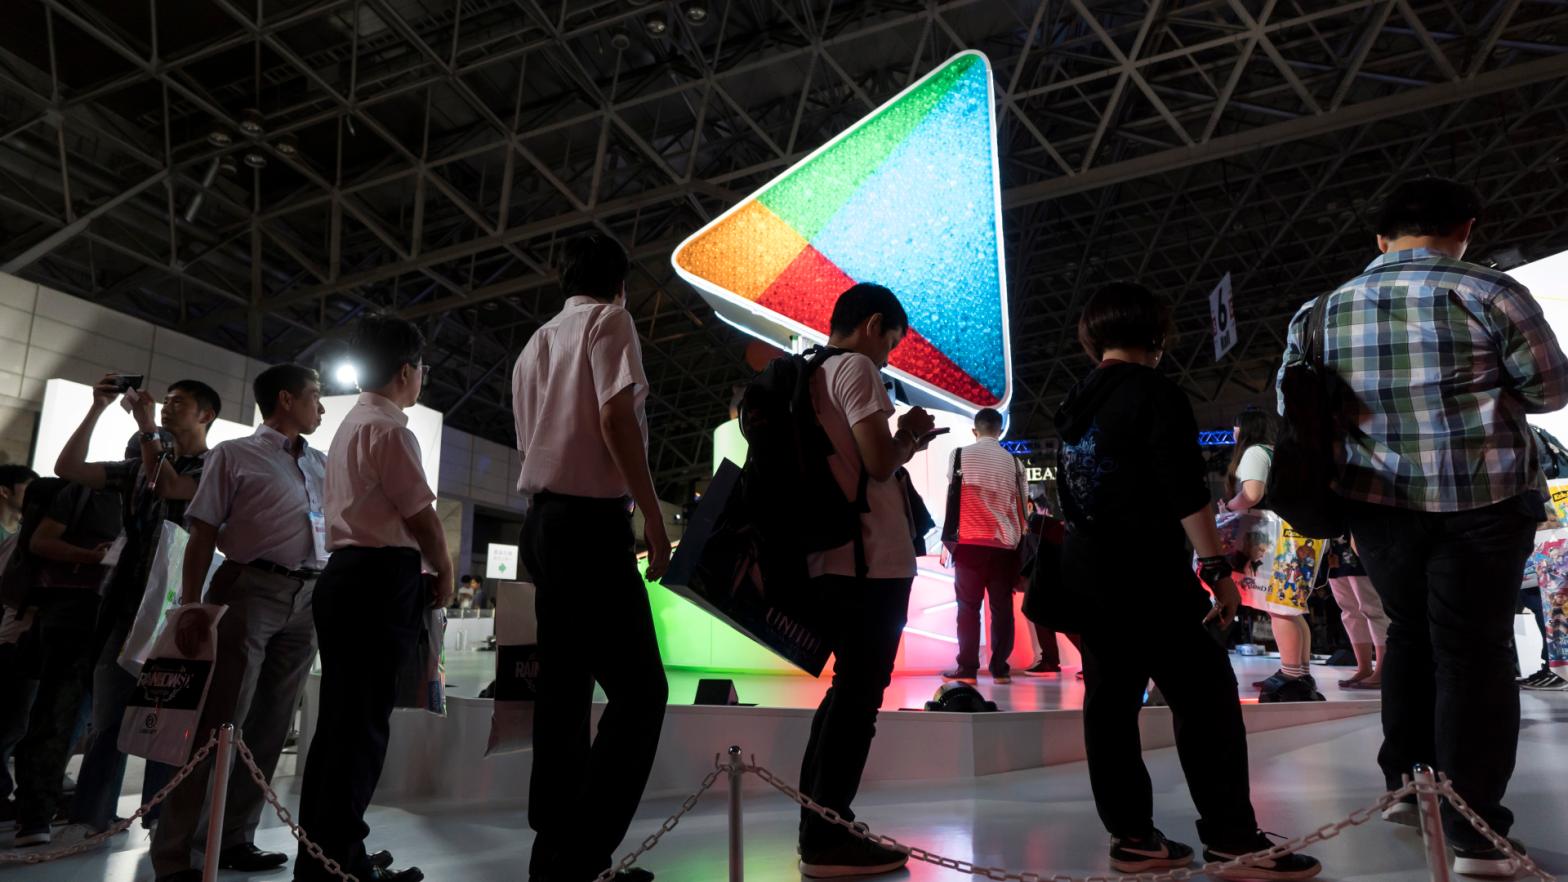 Tokyo Game Show attendees wait outside the Google Play booth in 2018. (Photo: Tomohiro Ohsumi, Getty Images)